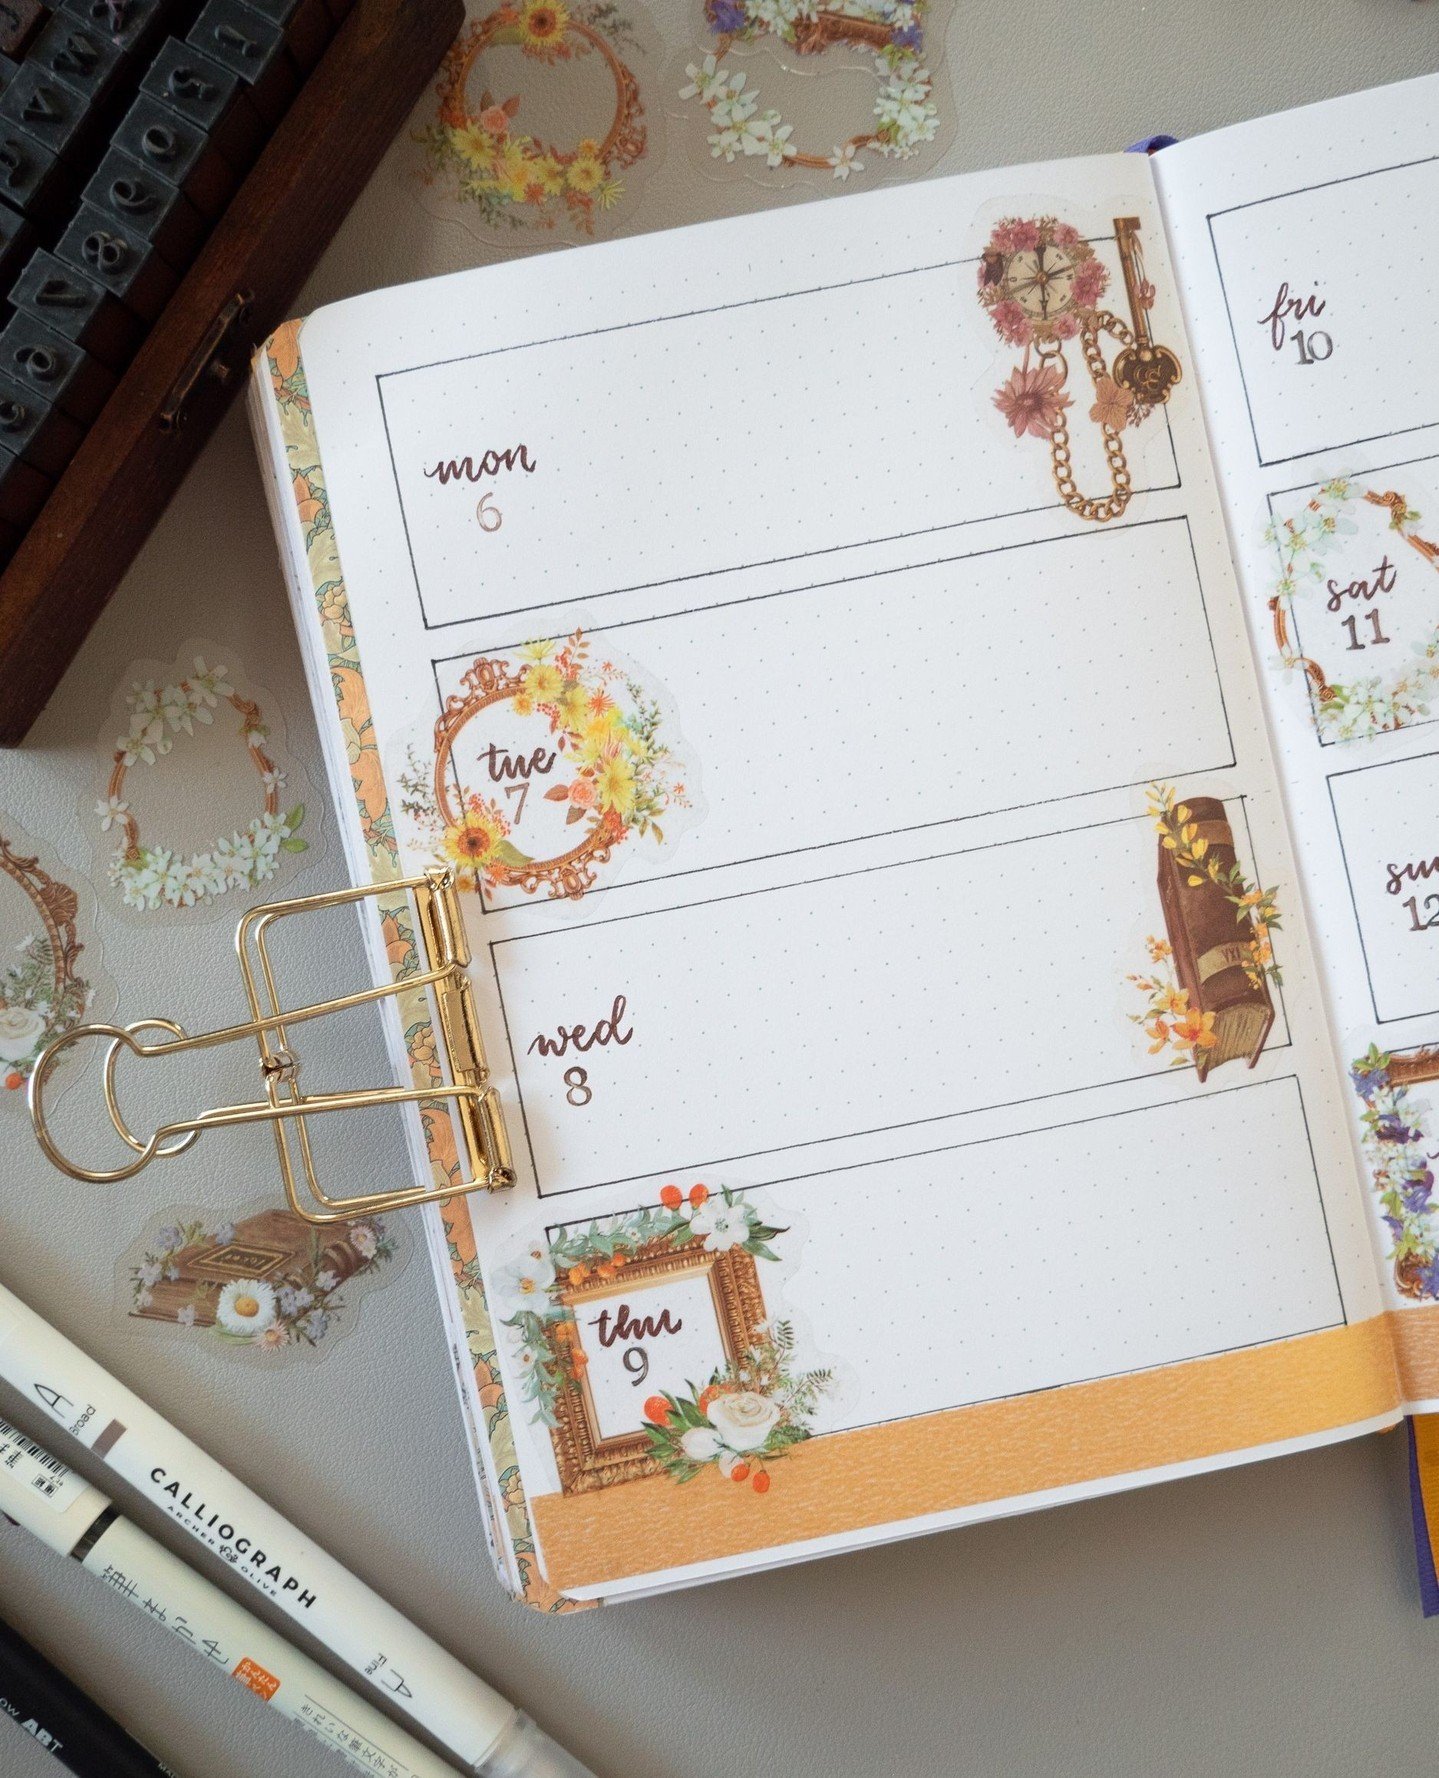 May weeklies in the Giveaway Journal - a bit out of order! Which is your favourite?